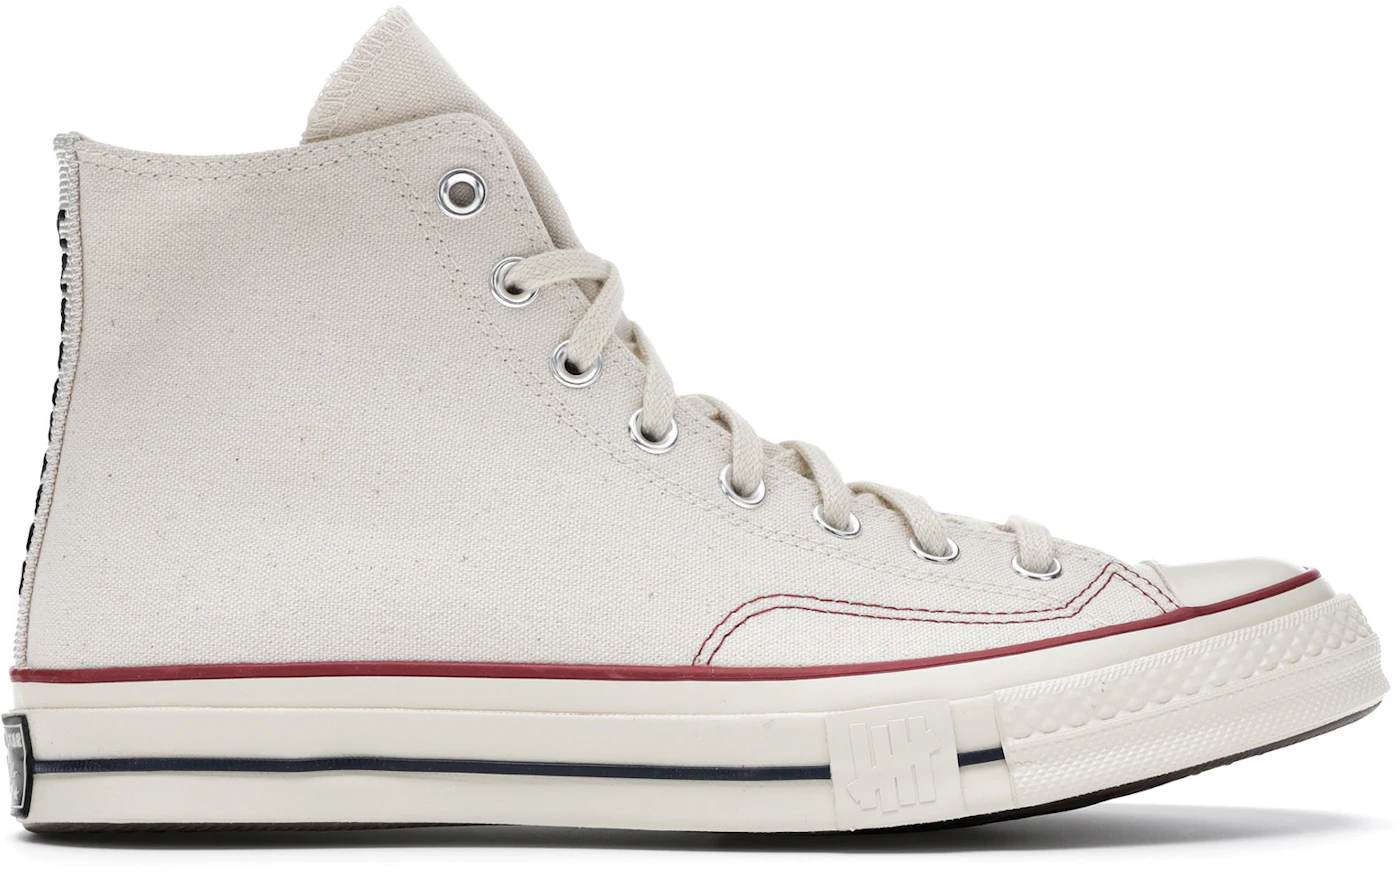 Converse Chuck Taylor All Star 70 Hi Undefeated Fundamentals Parchment ...